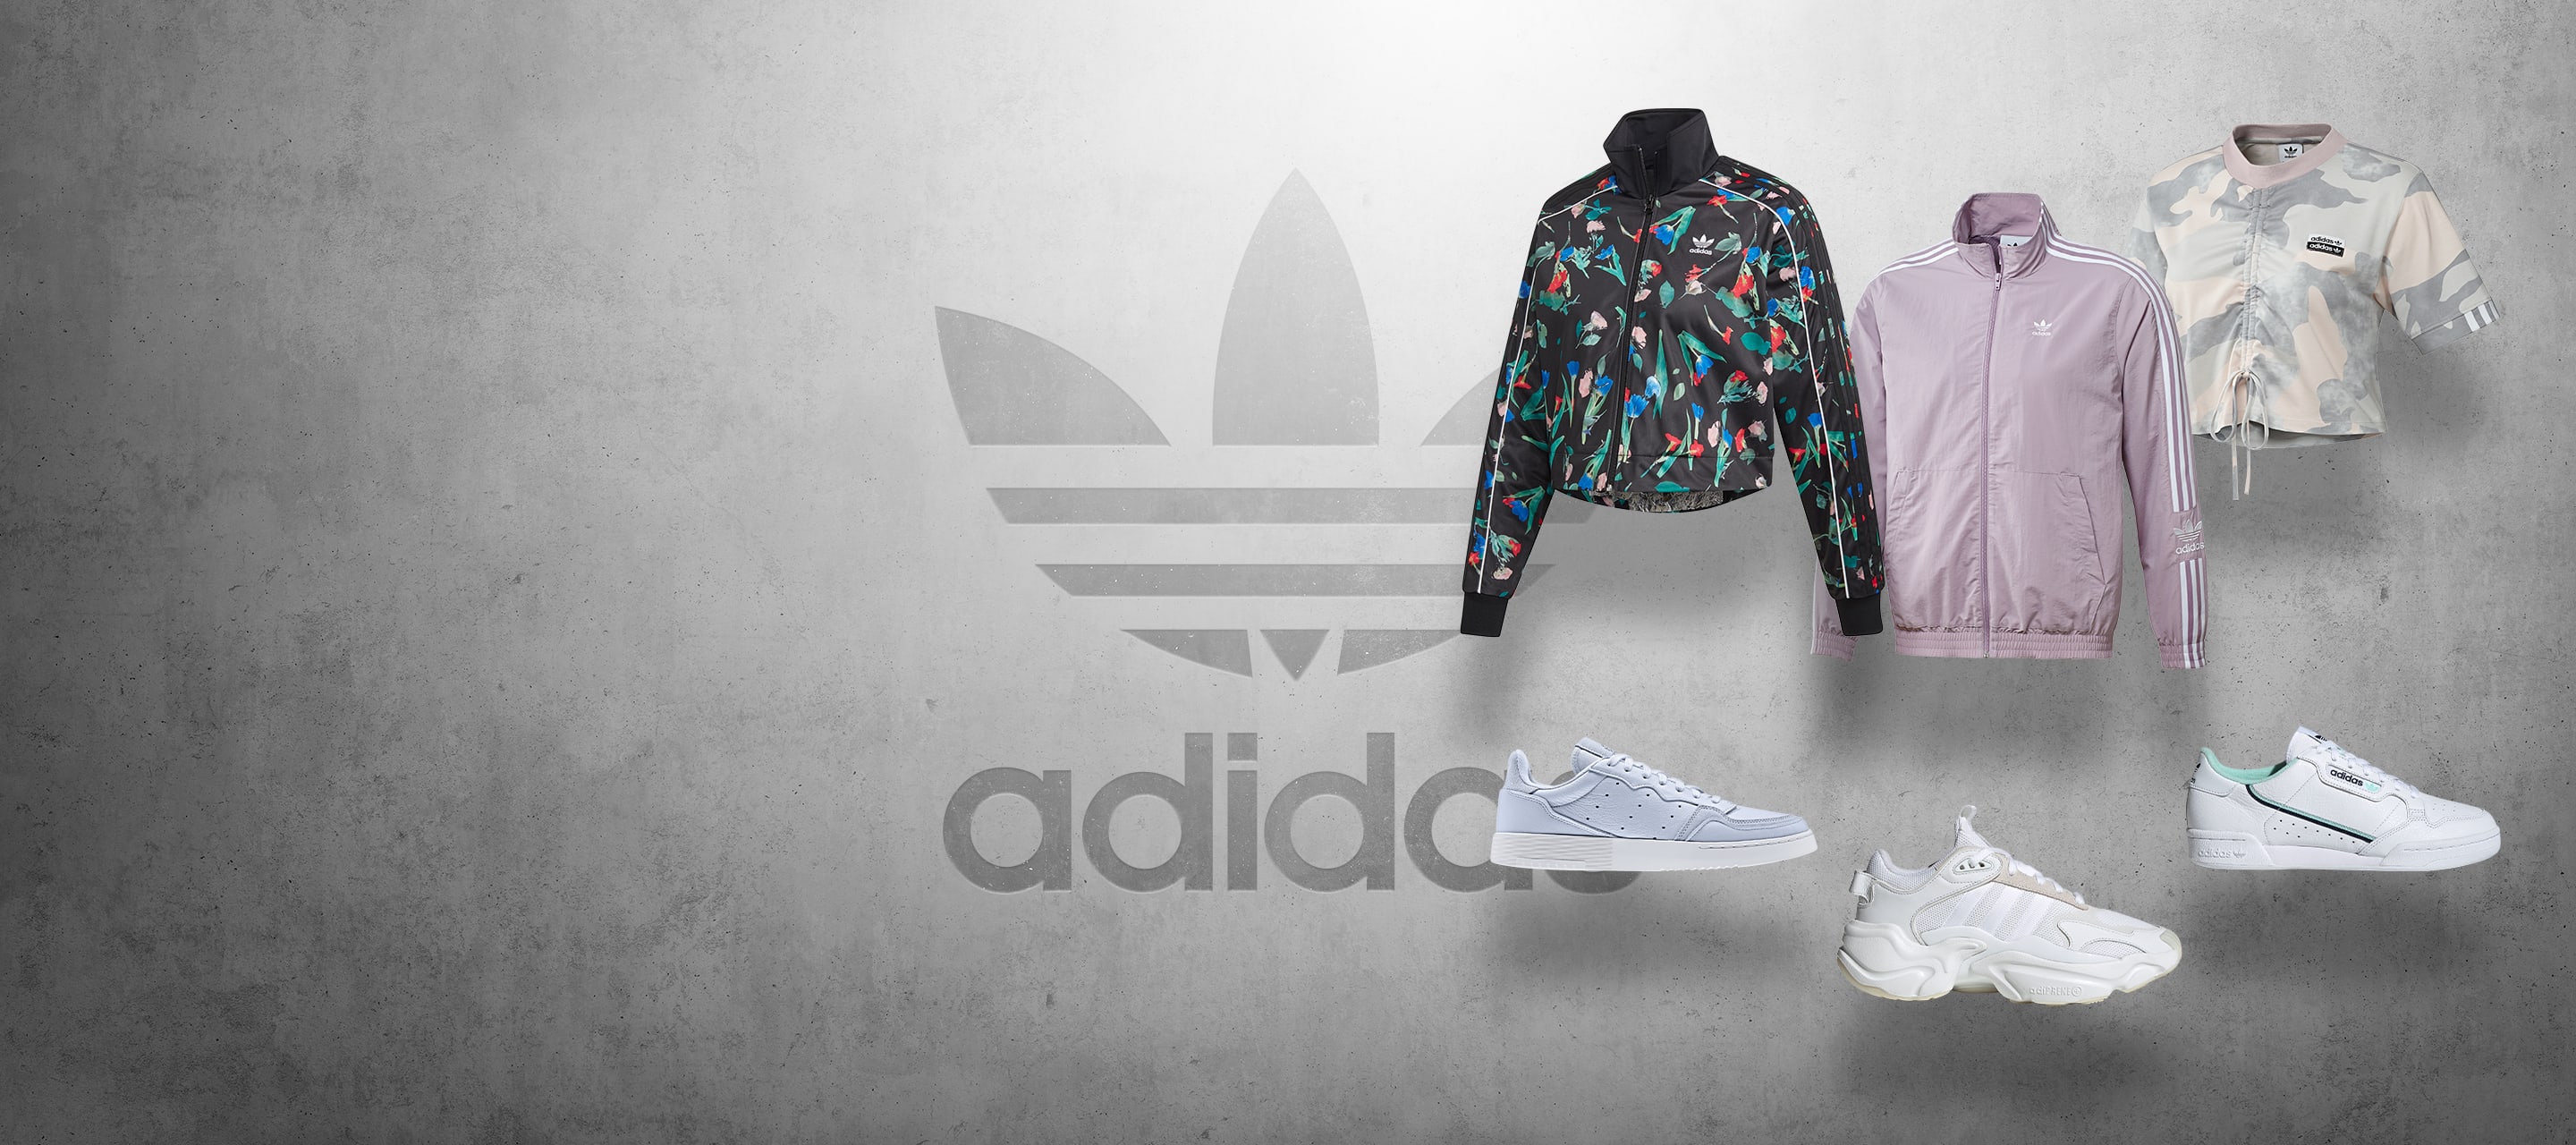 adidas outlet cz